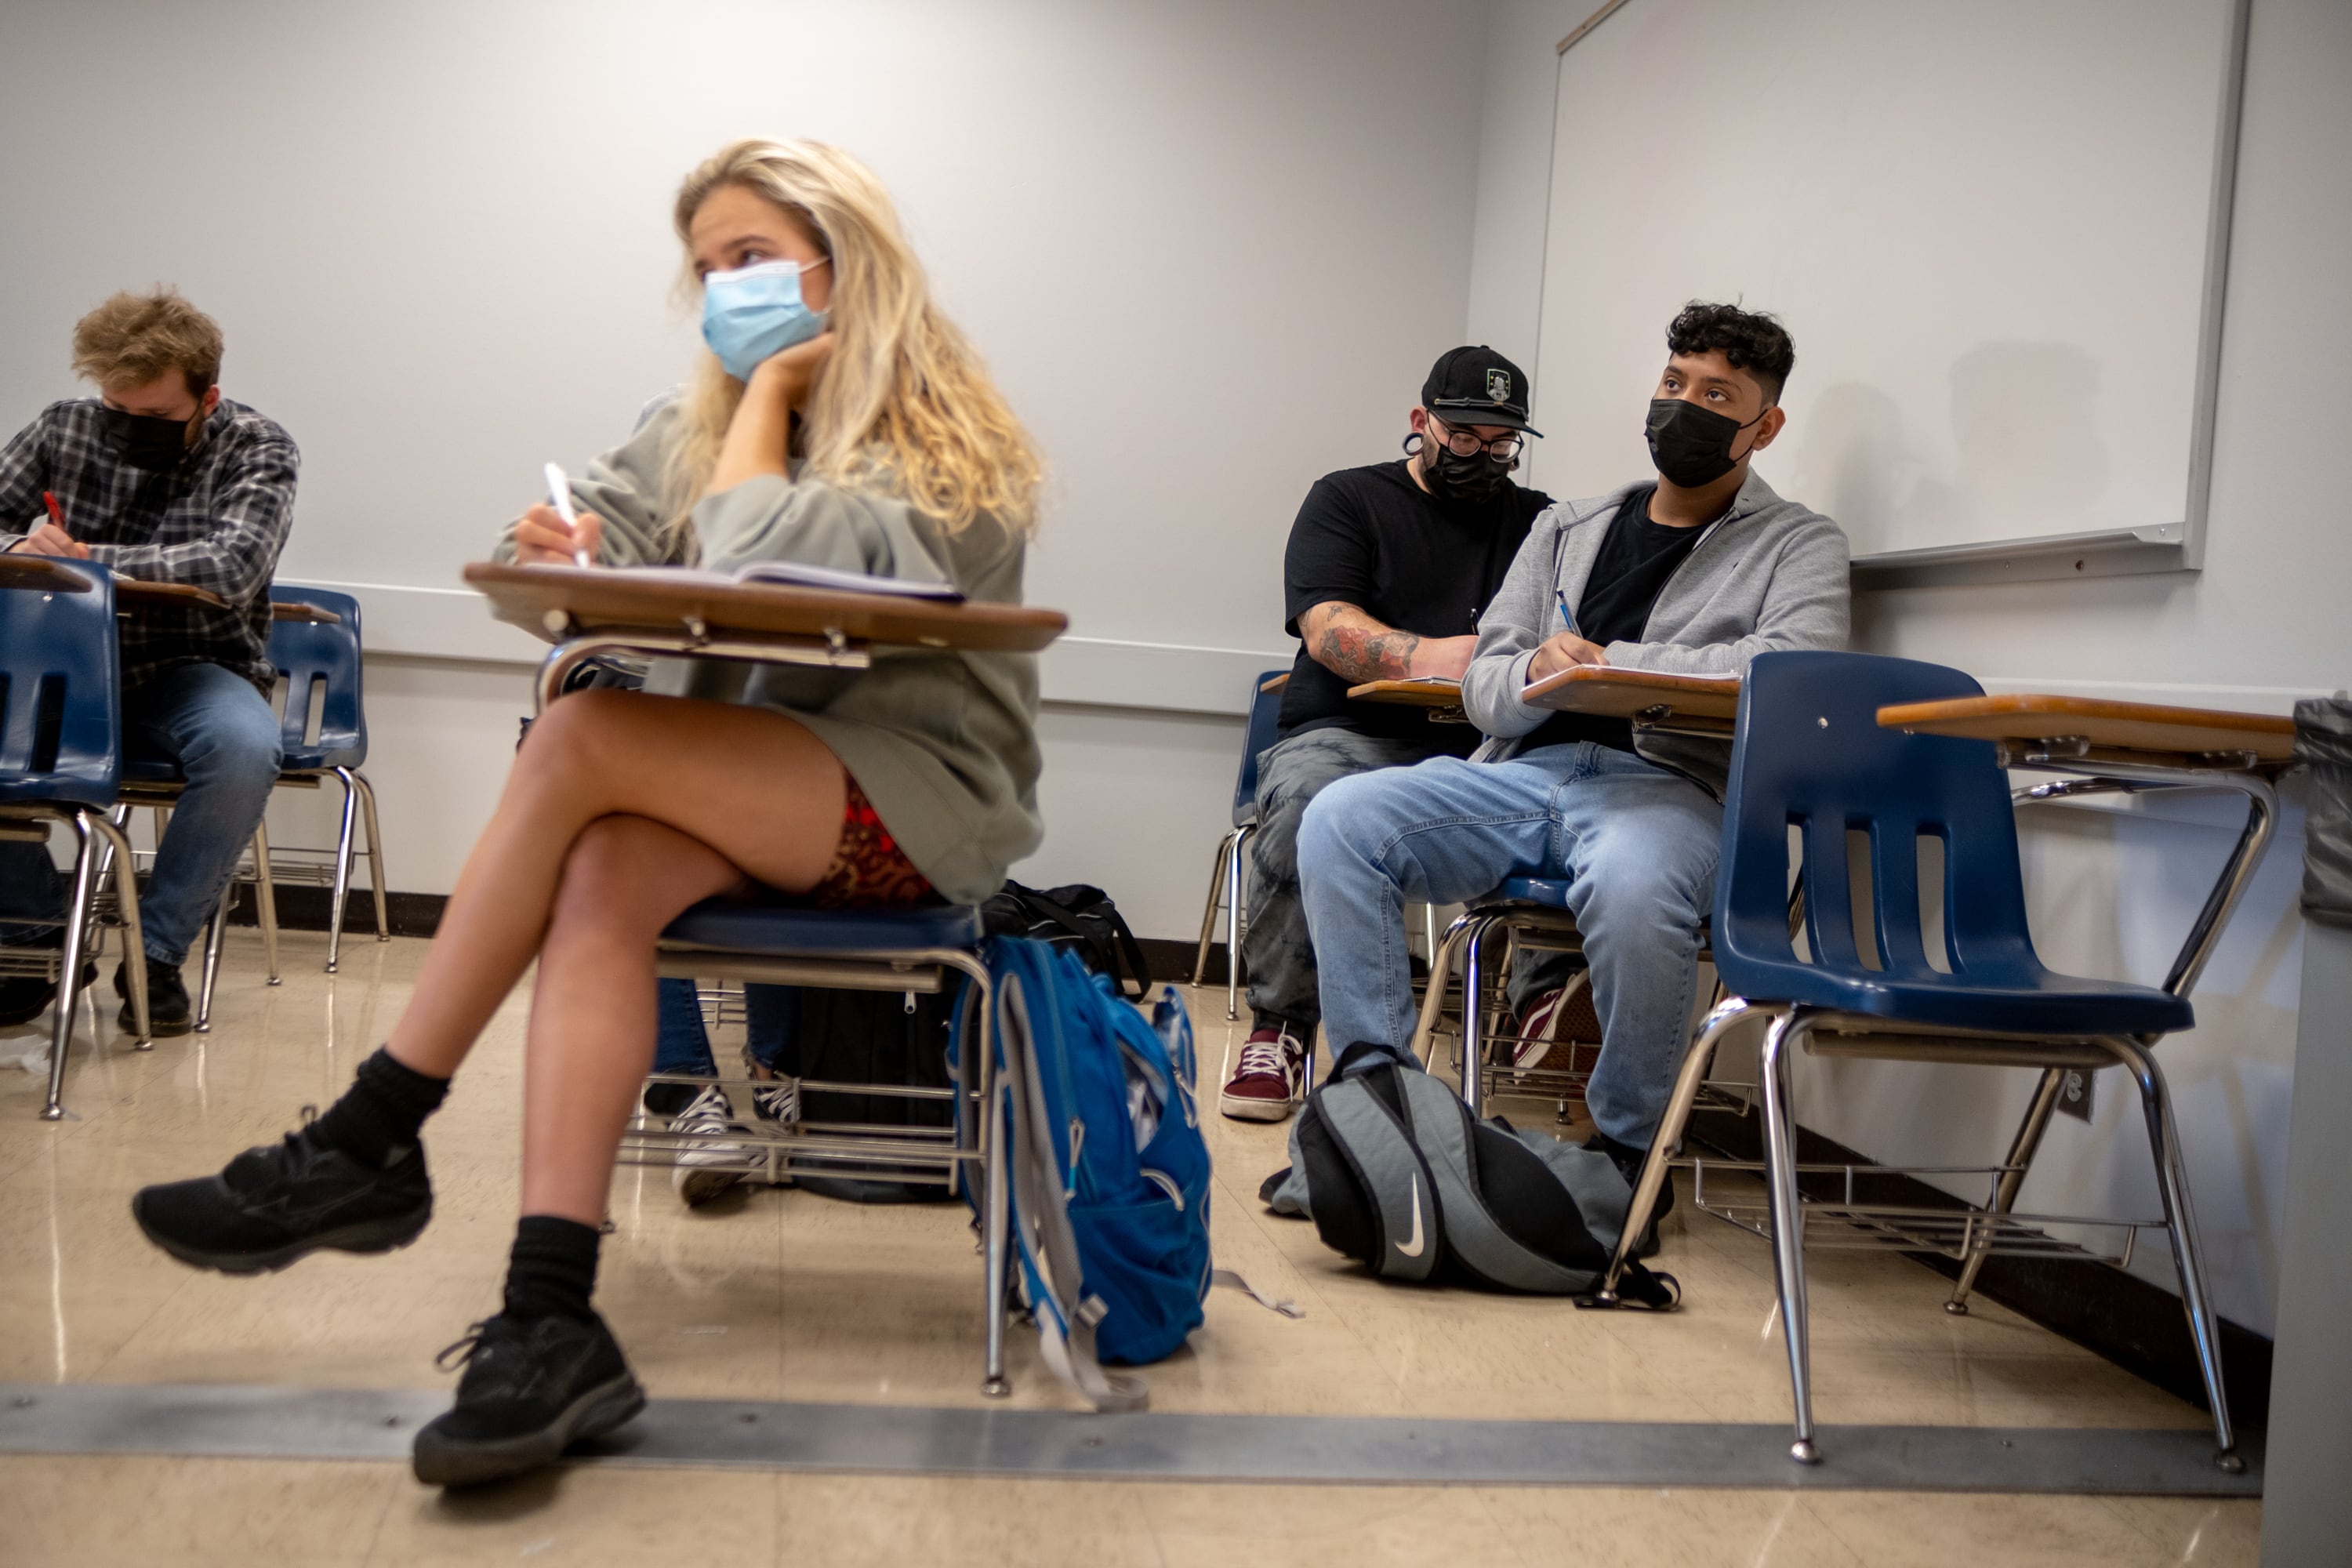 A student with long blonde hair and black shoes sits at a desk in the foreground of a classroom with white boards, while three other students wearing masks sit at desks in the background.